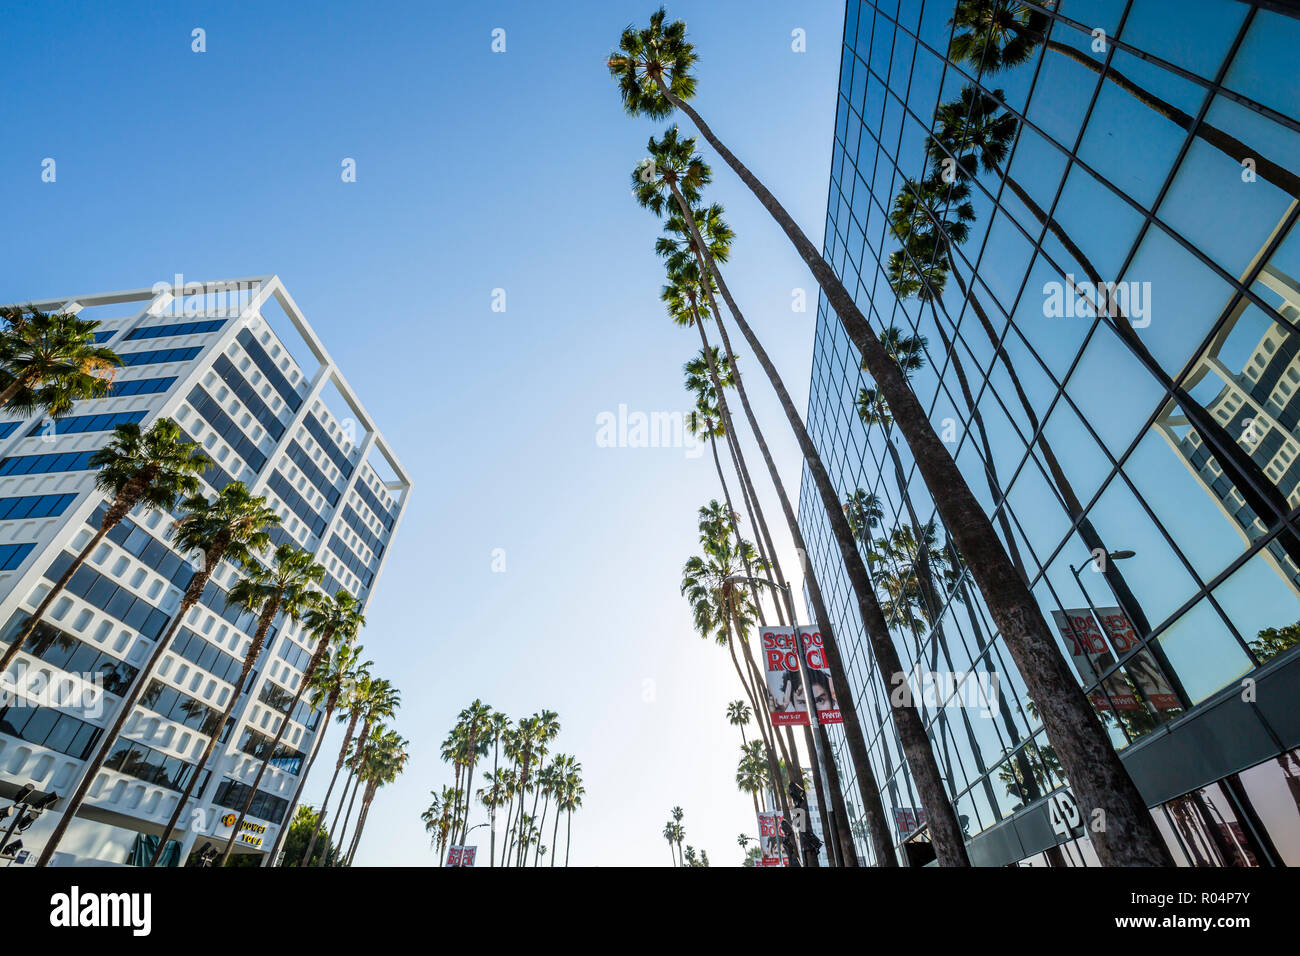 View of palm trees and contemporary architecture on Hollywood Boulevard, Los Angeles, California, United States of America, North America Stock Photo